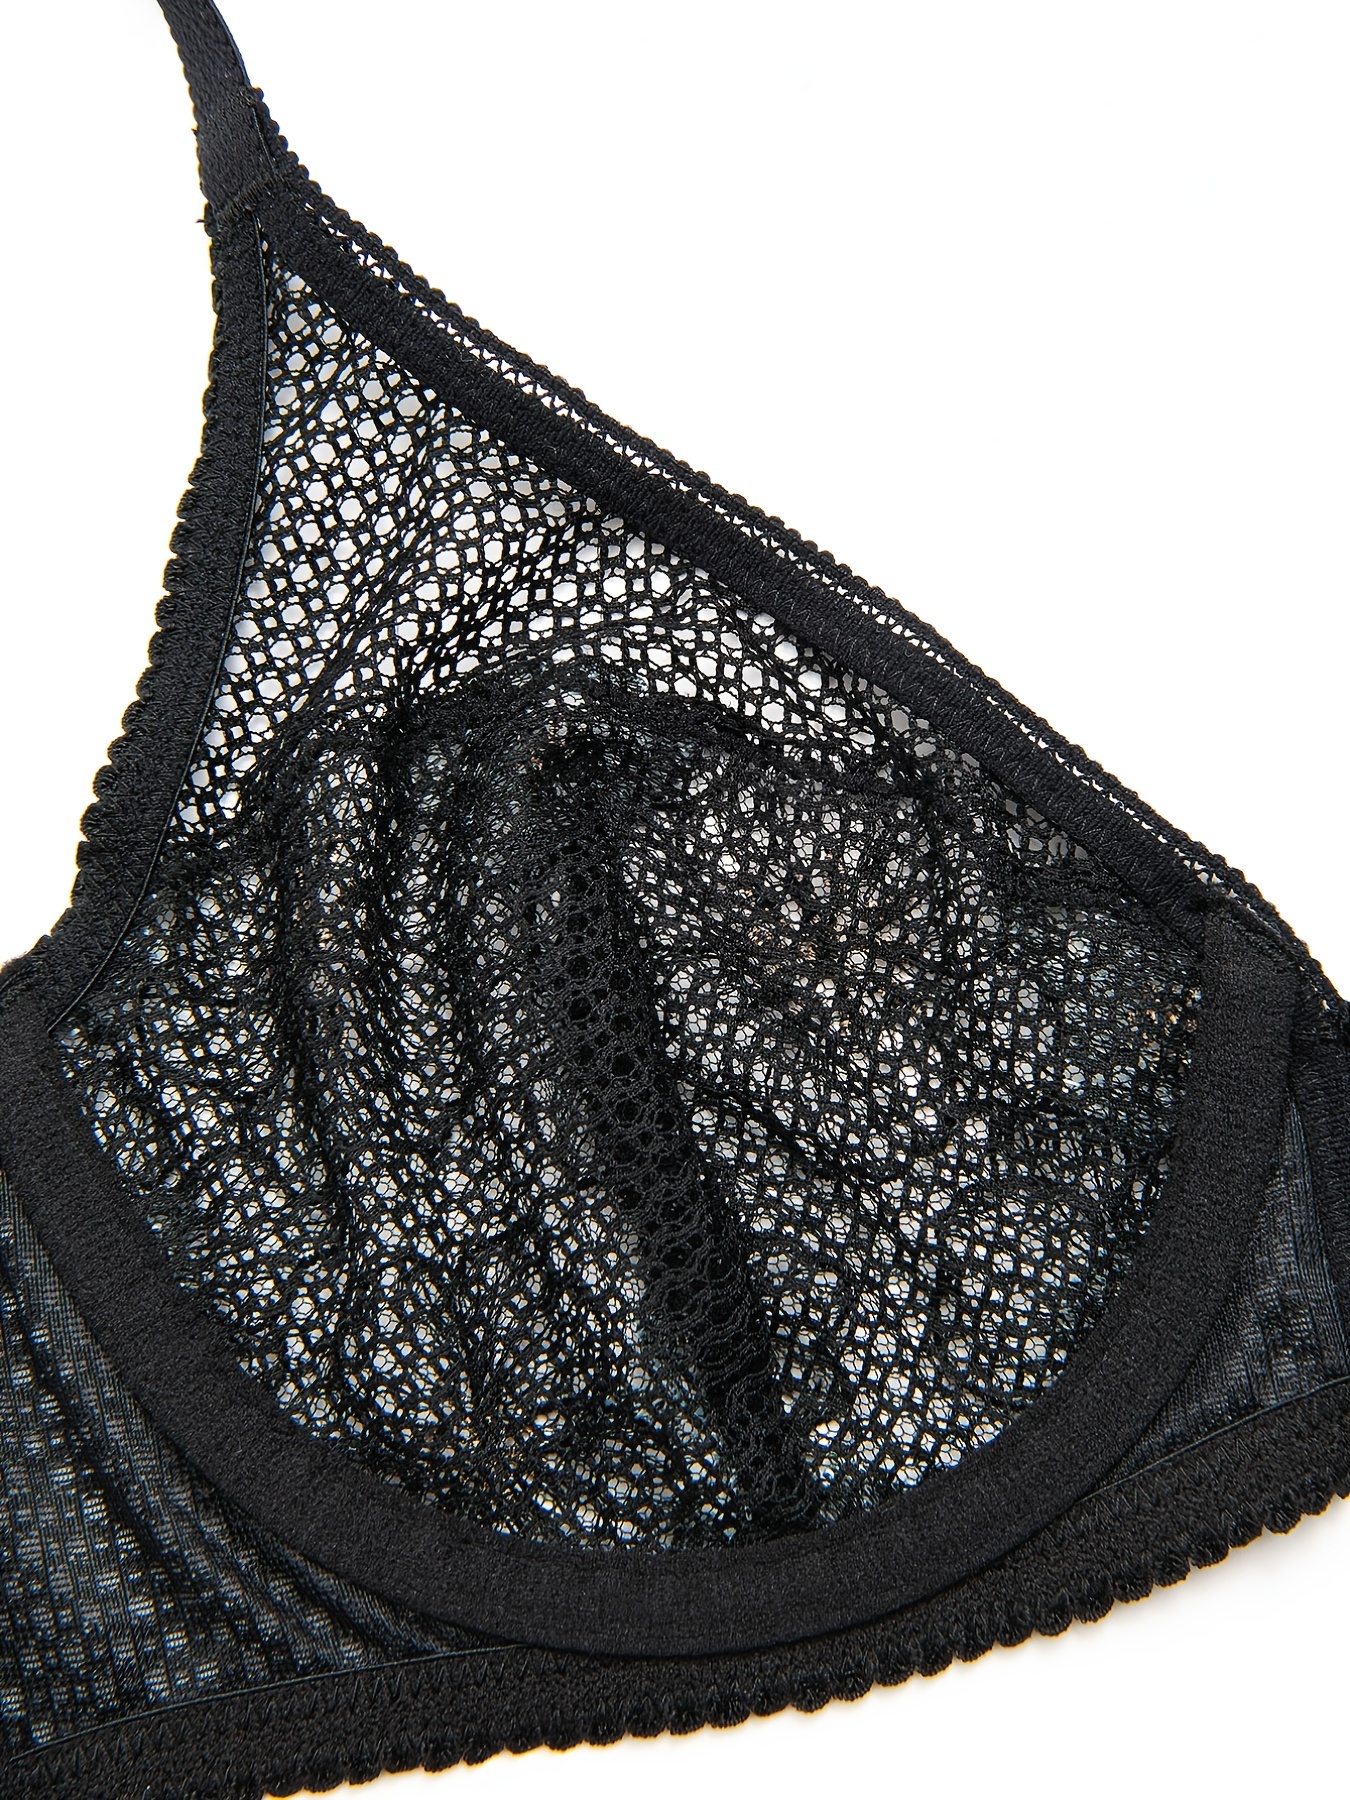 Wingslove® Unlined See Through 1/2 Cup Mesh Demi Shelf Underwired Bra Black  